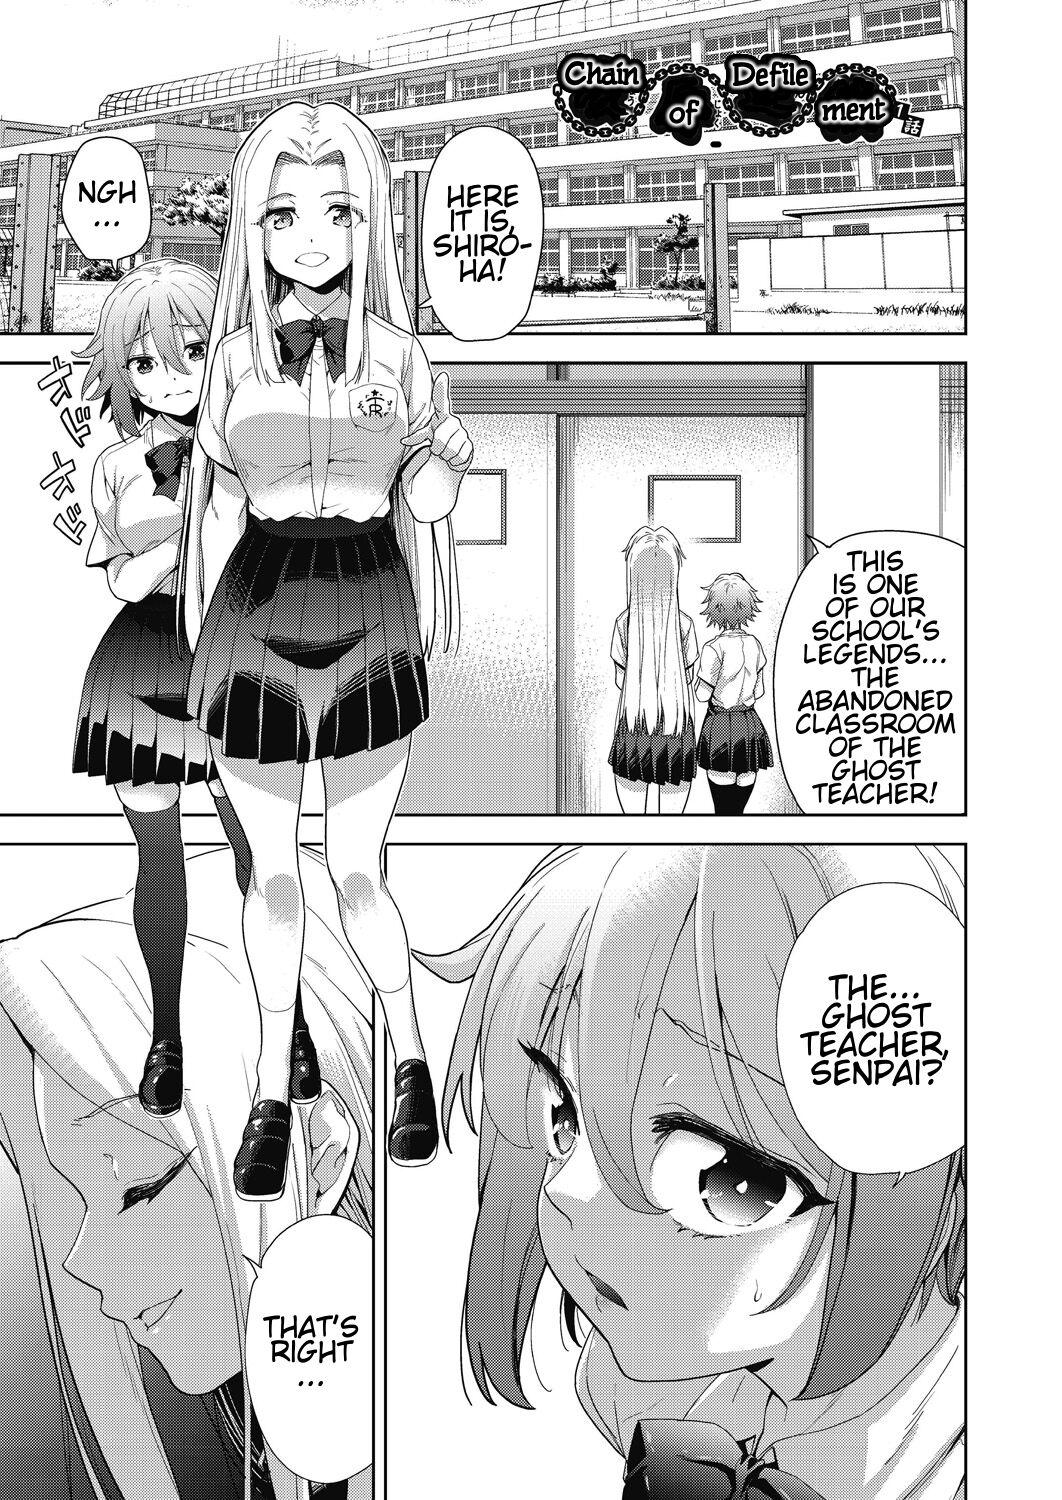 Gay Cash Ryoujoku Rensa | Chain of Defilement Ch. 1 Creampies - Page 1